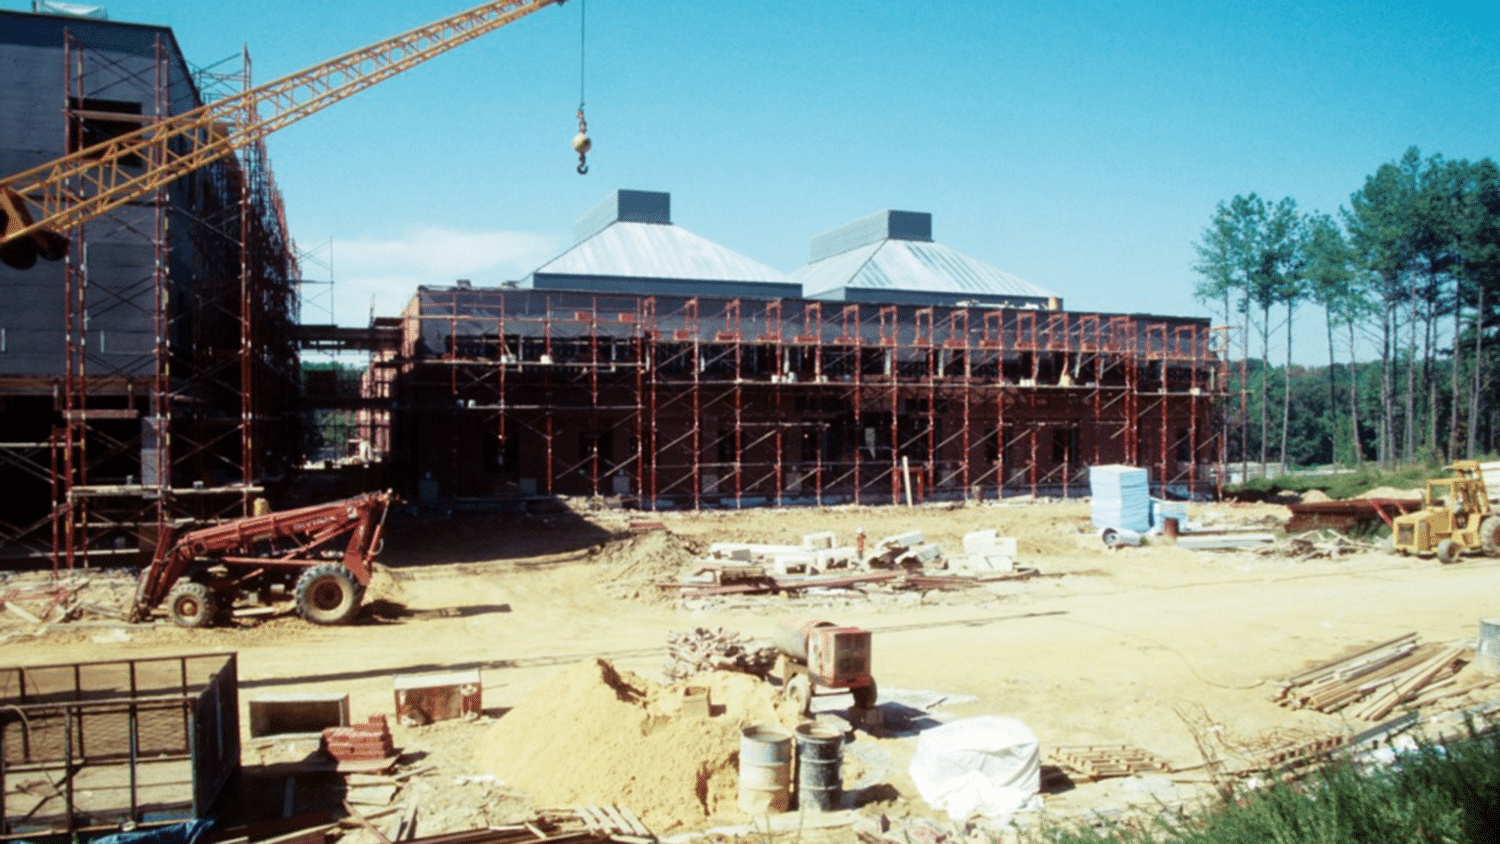 An old photo showing the construction of the buildings for the College of Textiles